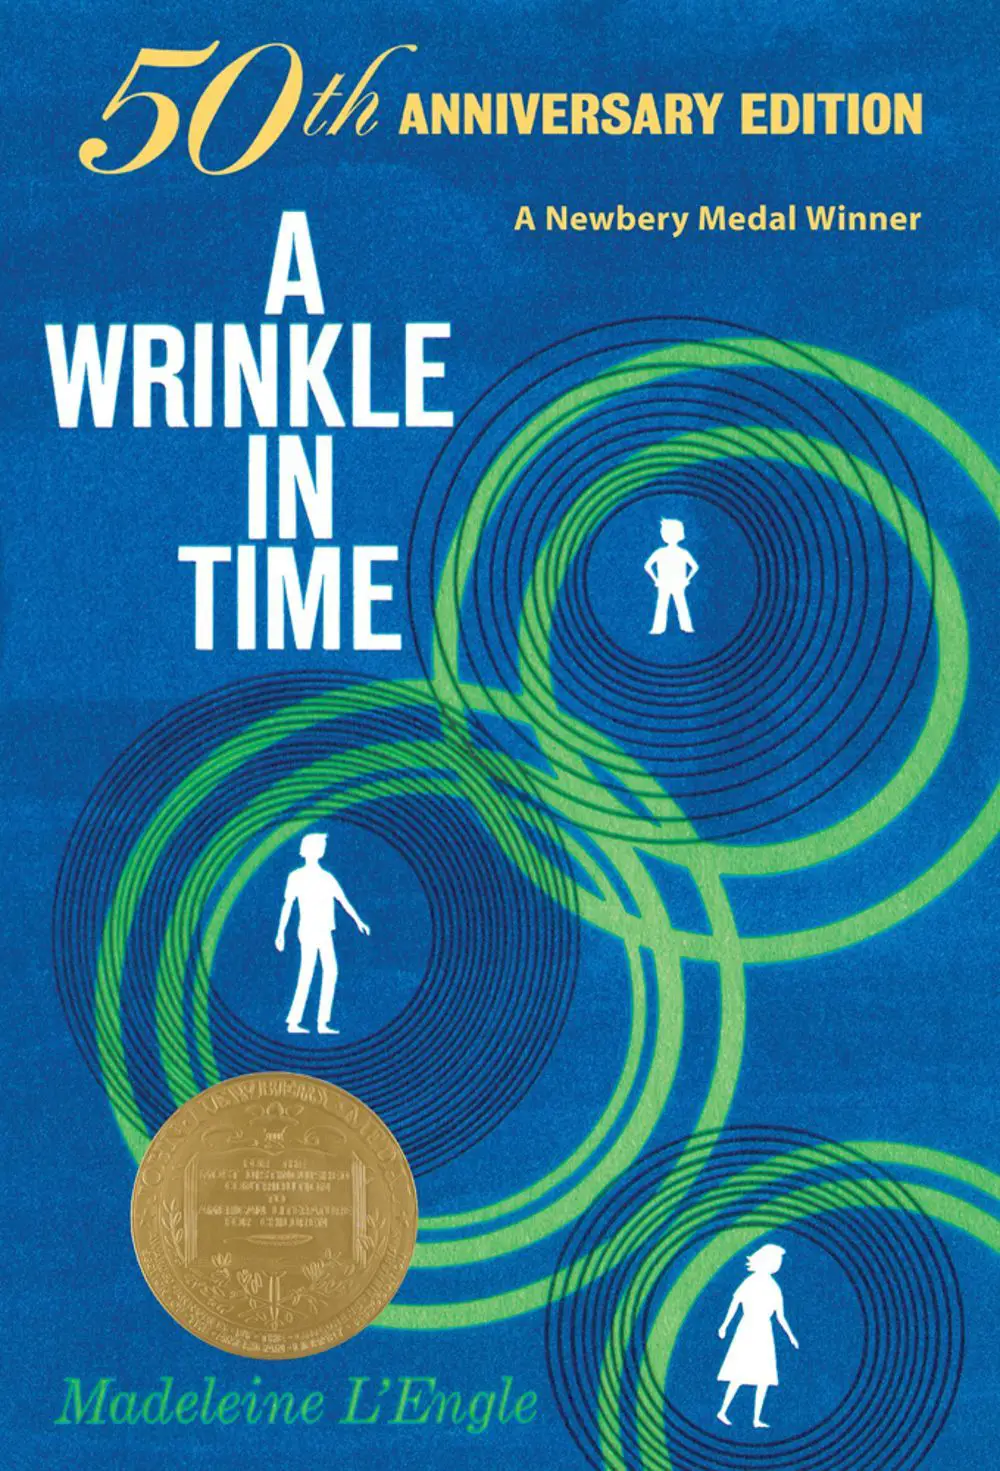 A Wrinkle in Time 50th anniversary edition